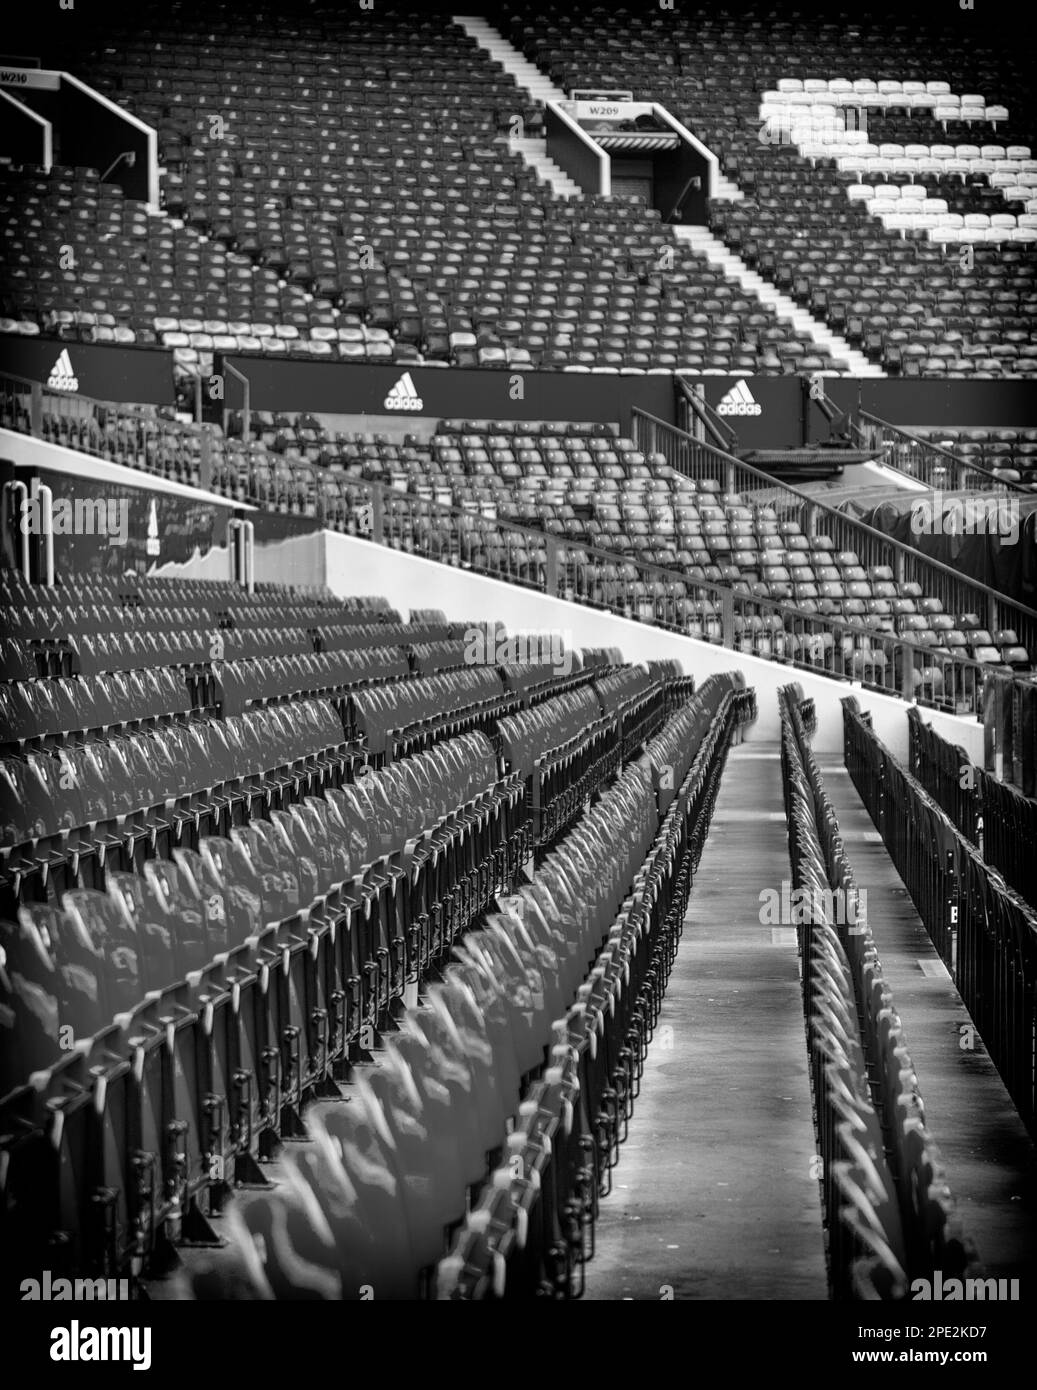 Black and White Image of Row upon Row of Empty Seats at Old Trafford, Home of Manchester United Stock Photo